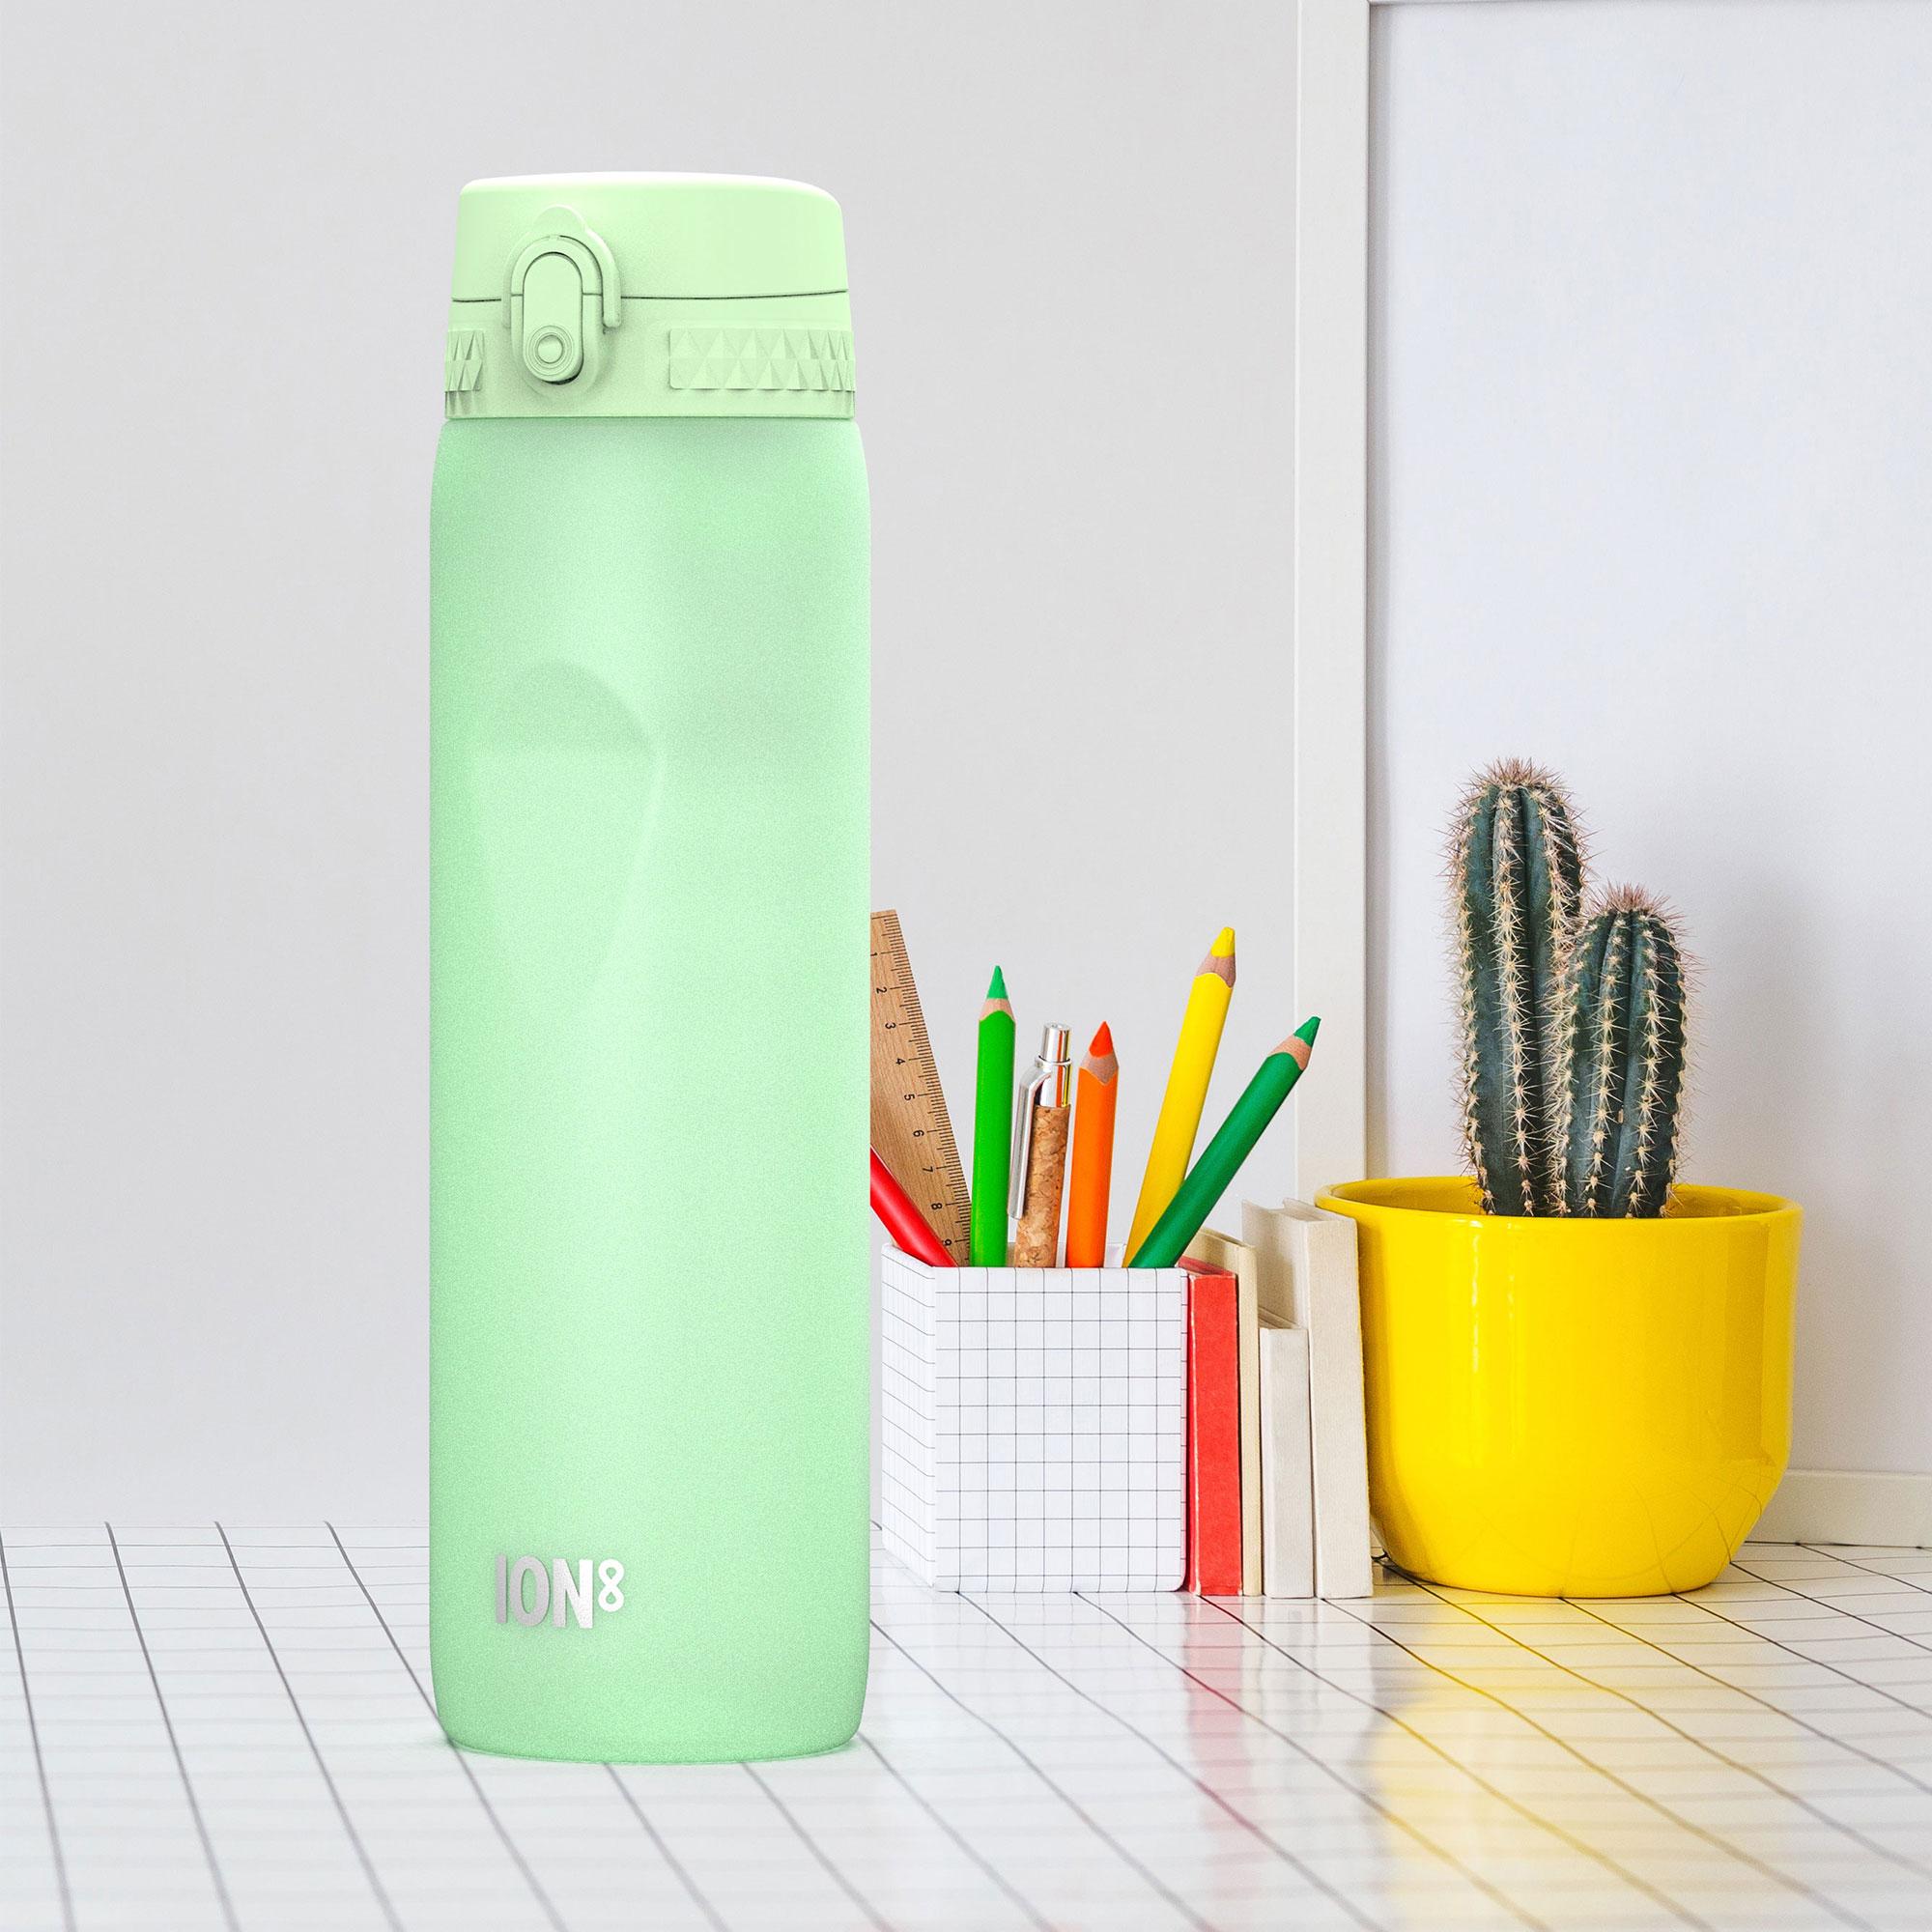 Ion8 Quench Recyclon Drink Bottle 1L Green Image 2